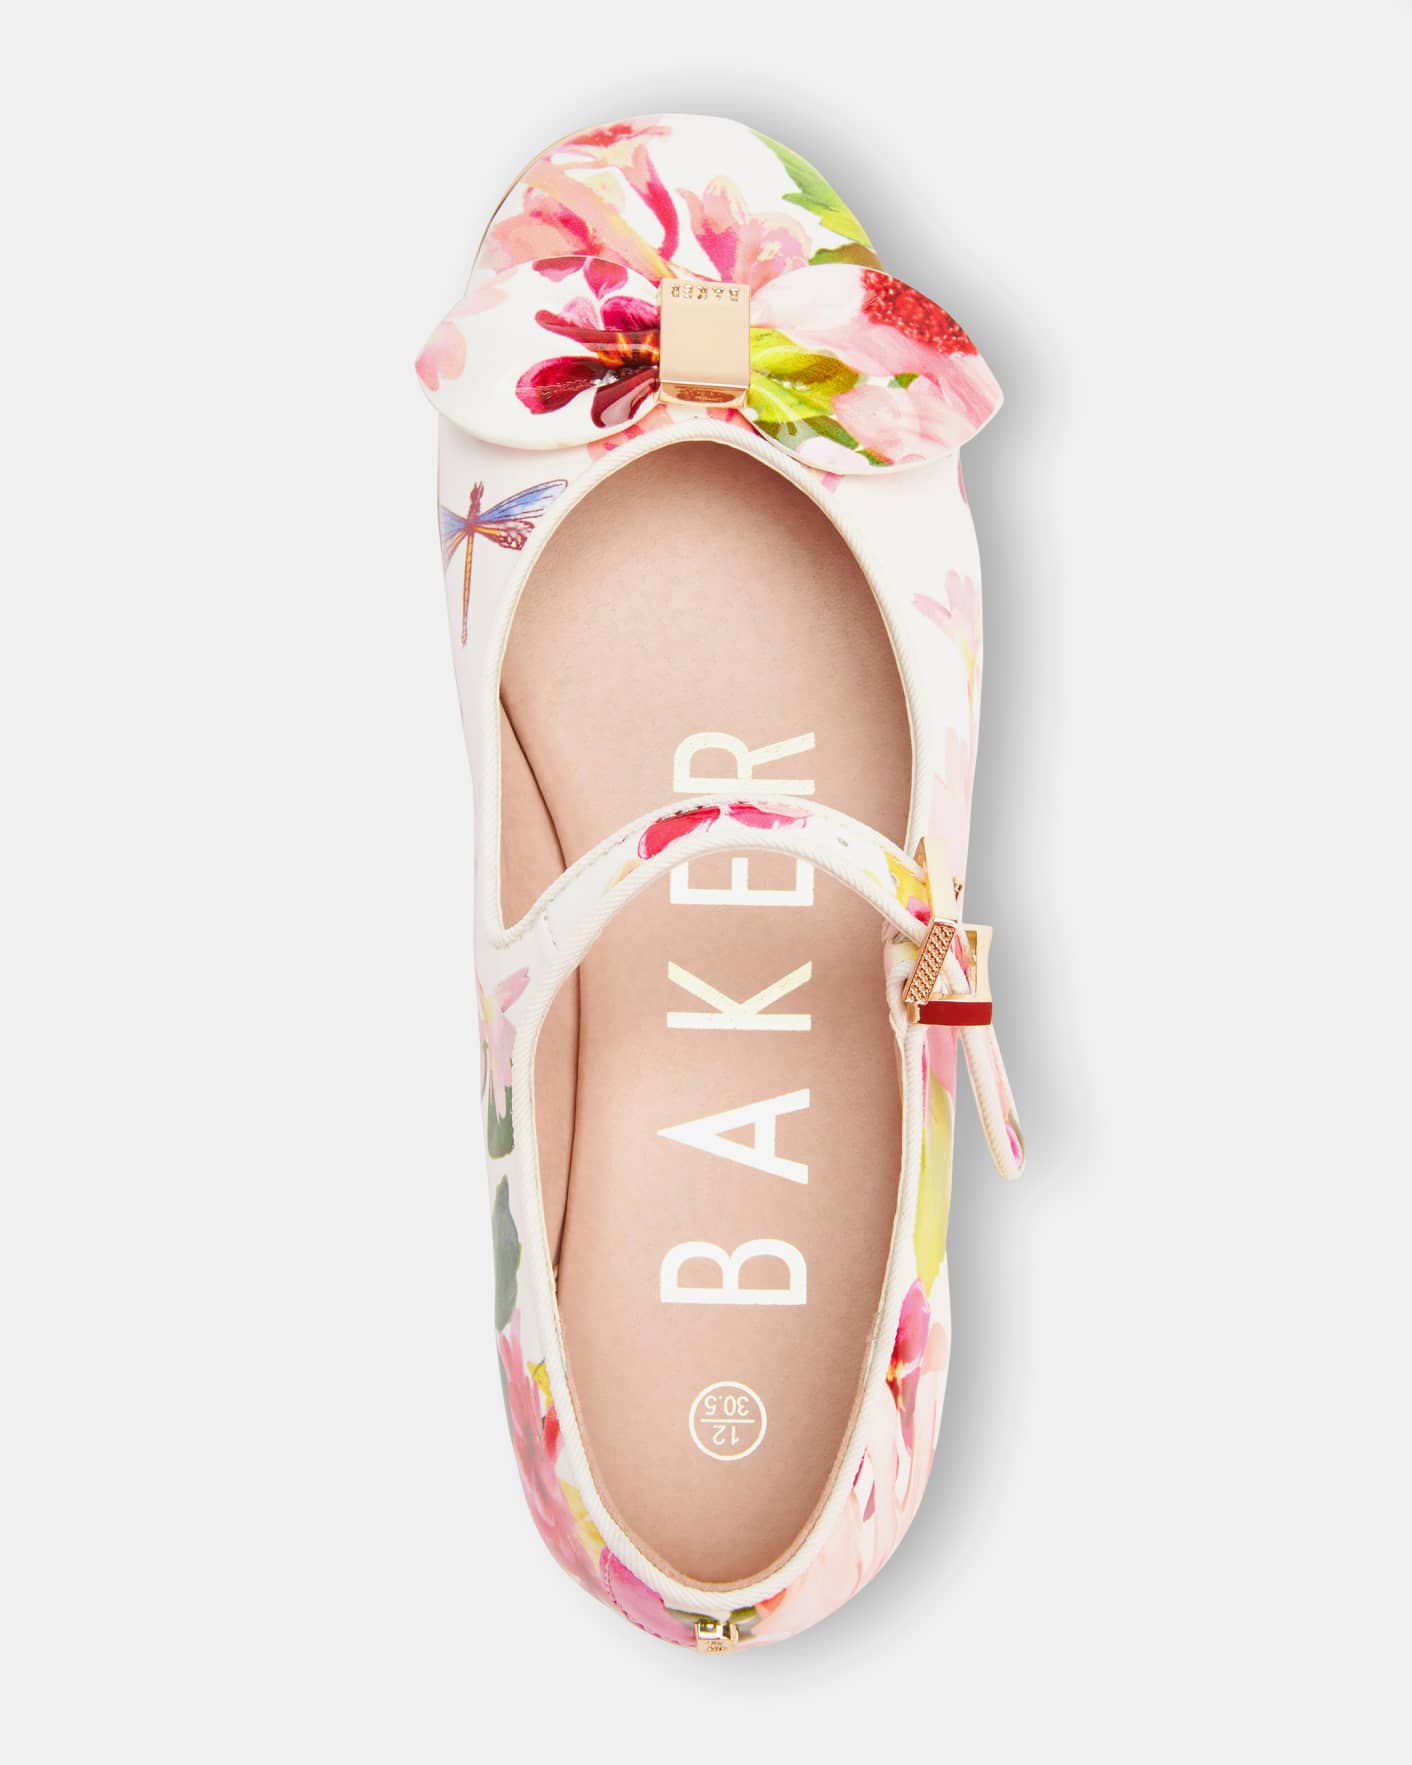 White M46286 Floral Bow Shoe Ted Baker